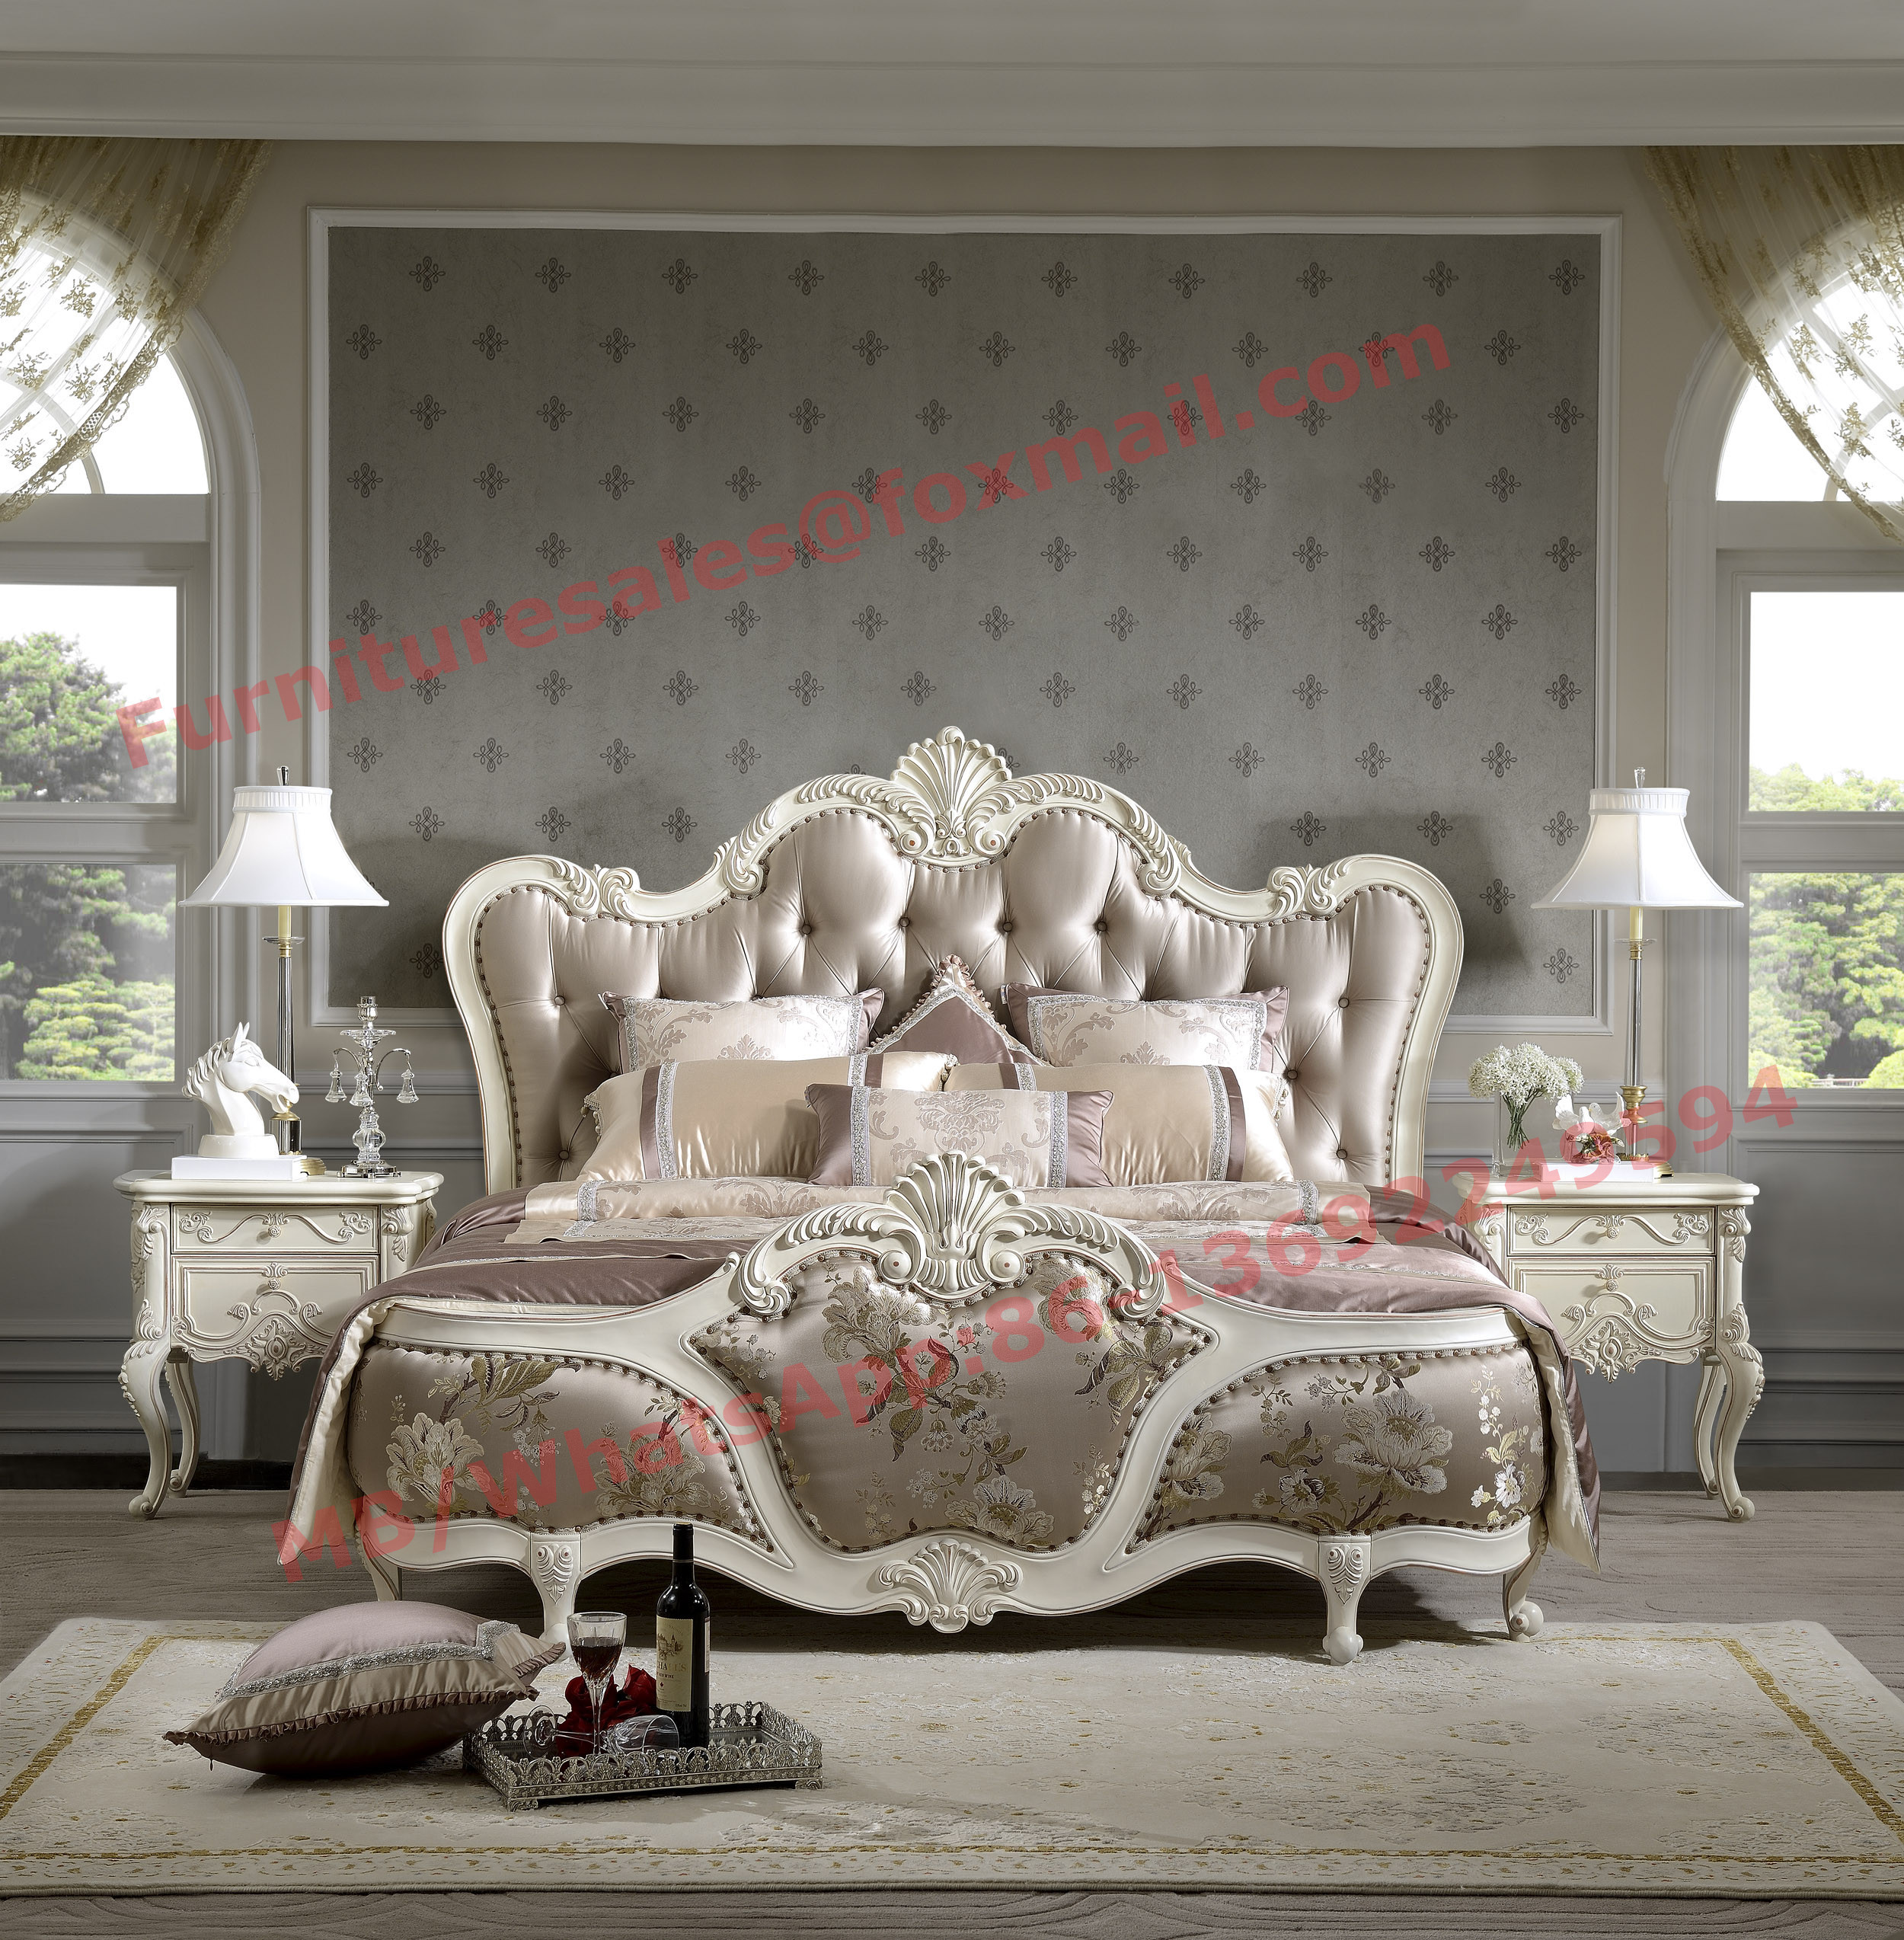 Wholesale Family use from China Factory Outlets Decoration Bedrooms Furniture set in Cheap Price from china suppliers